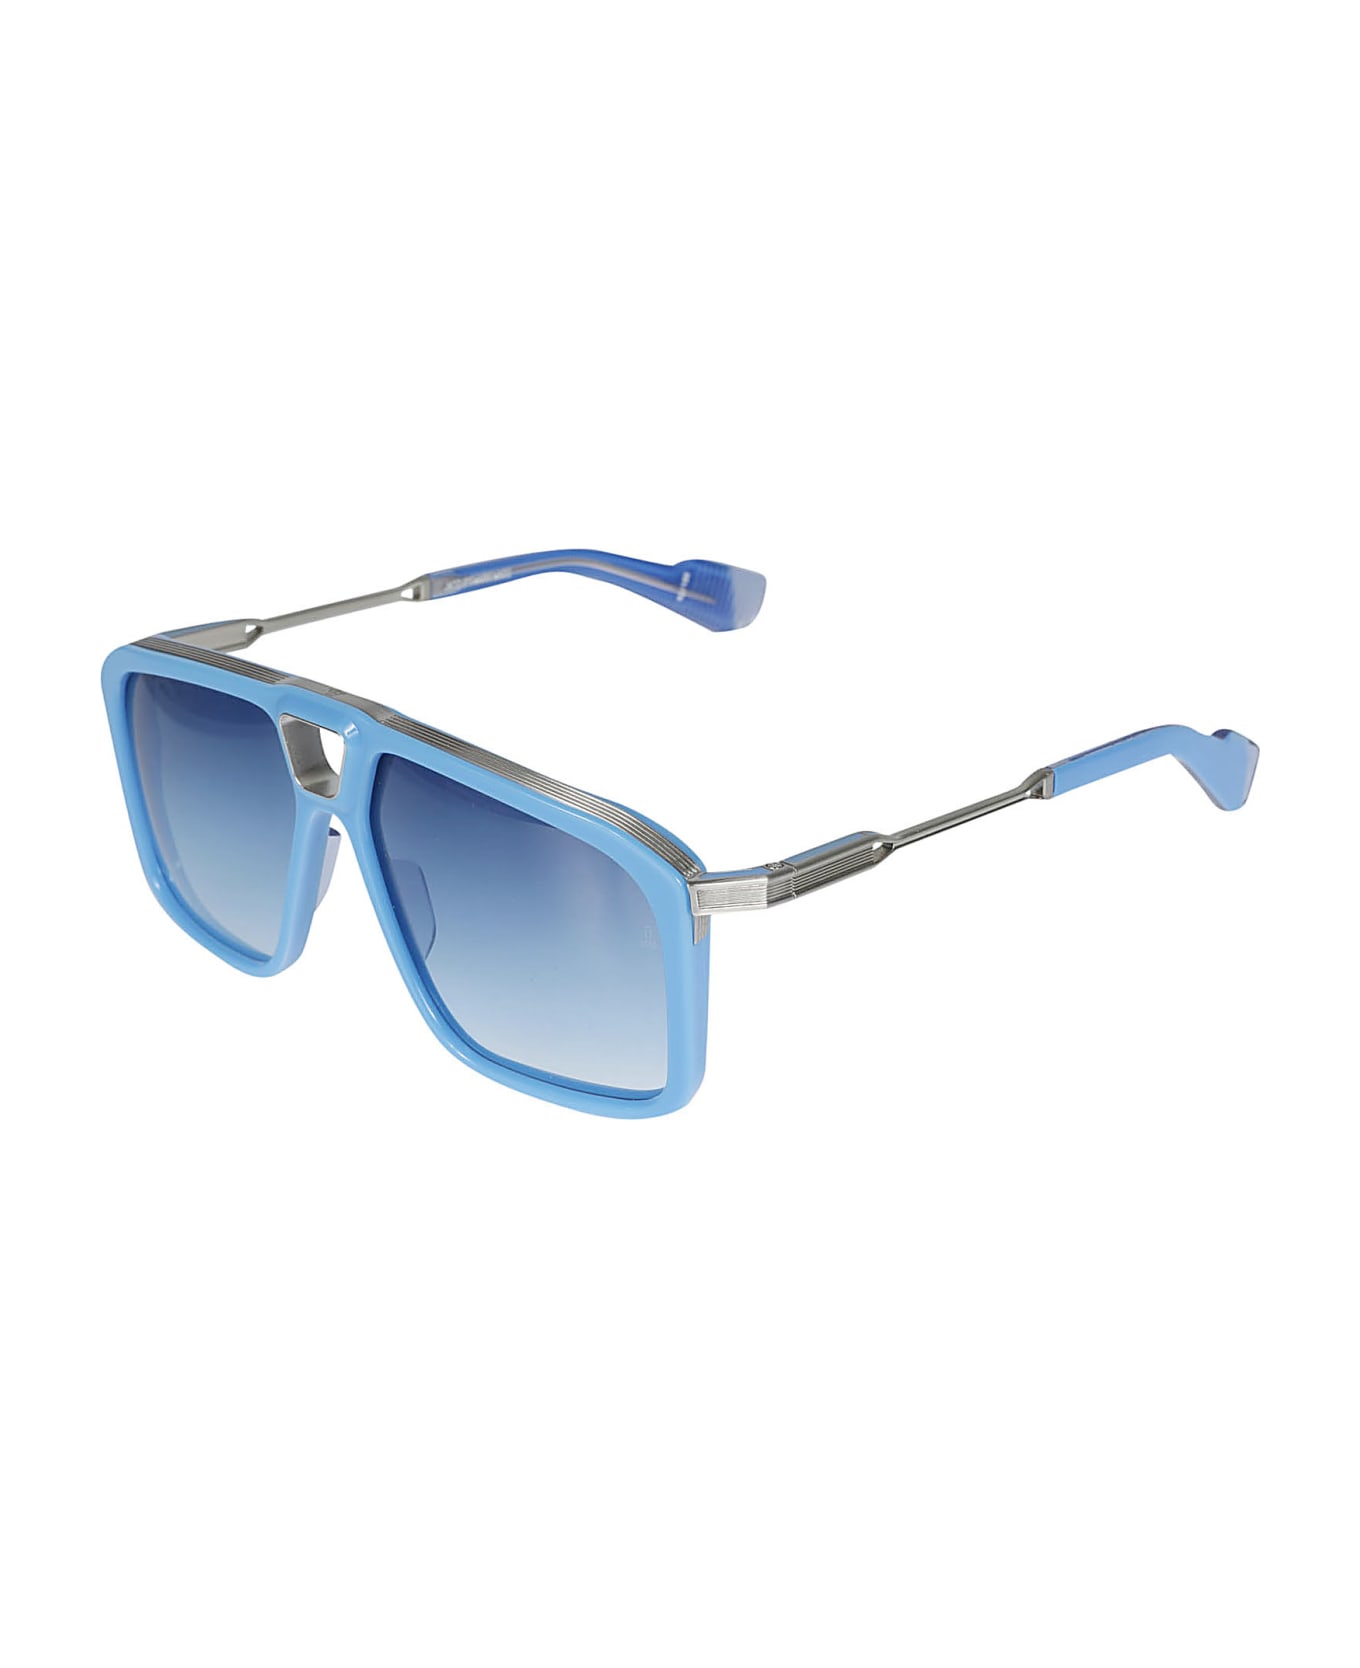 Jacques Marie Mage Savoy Sunglasses pearl - Blue